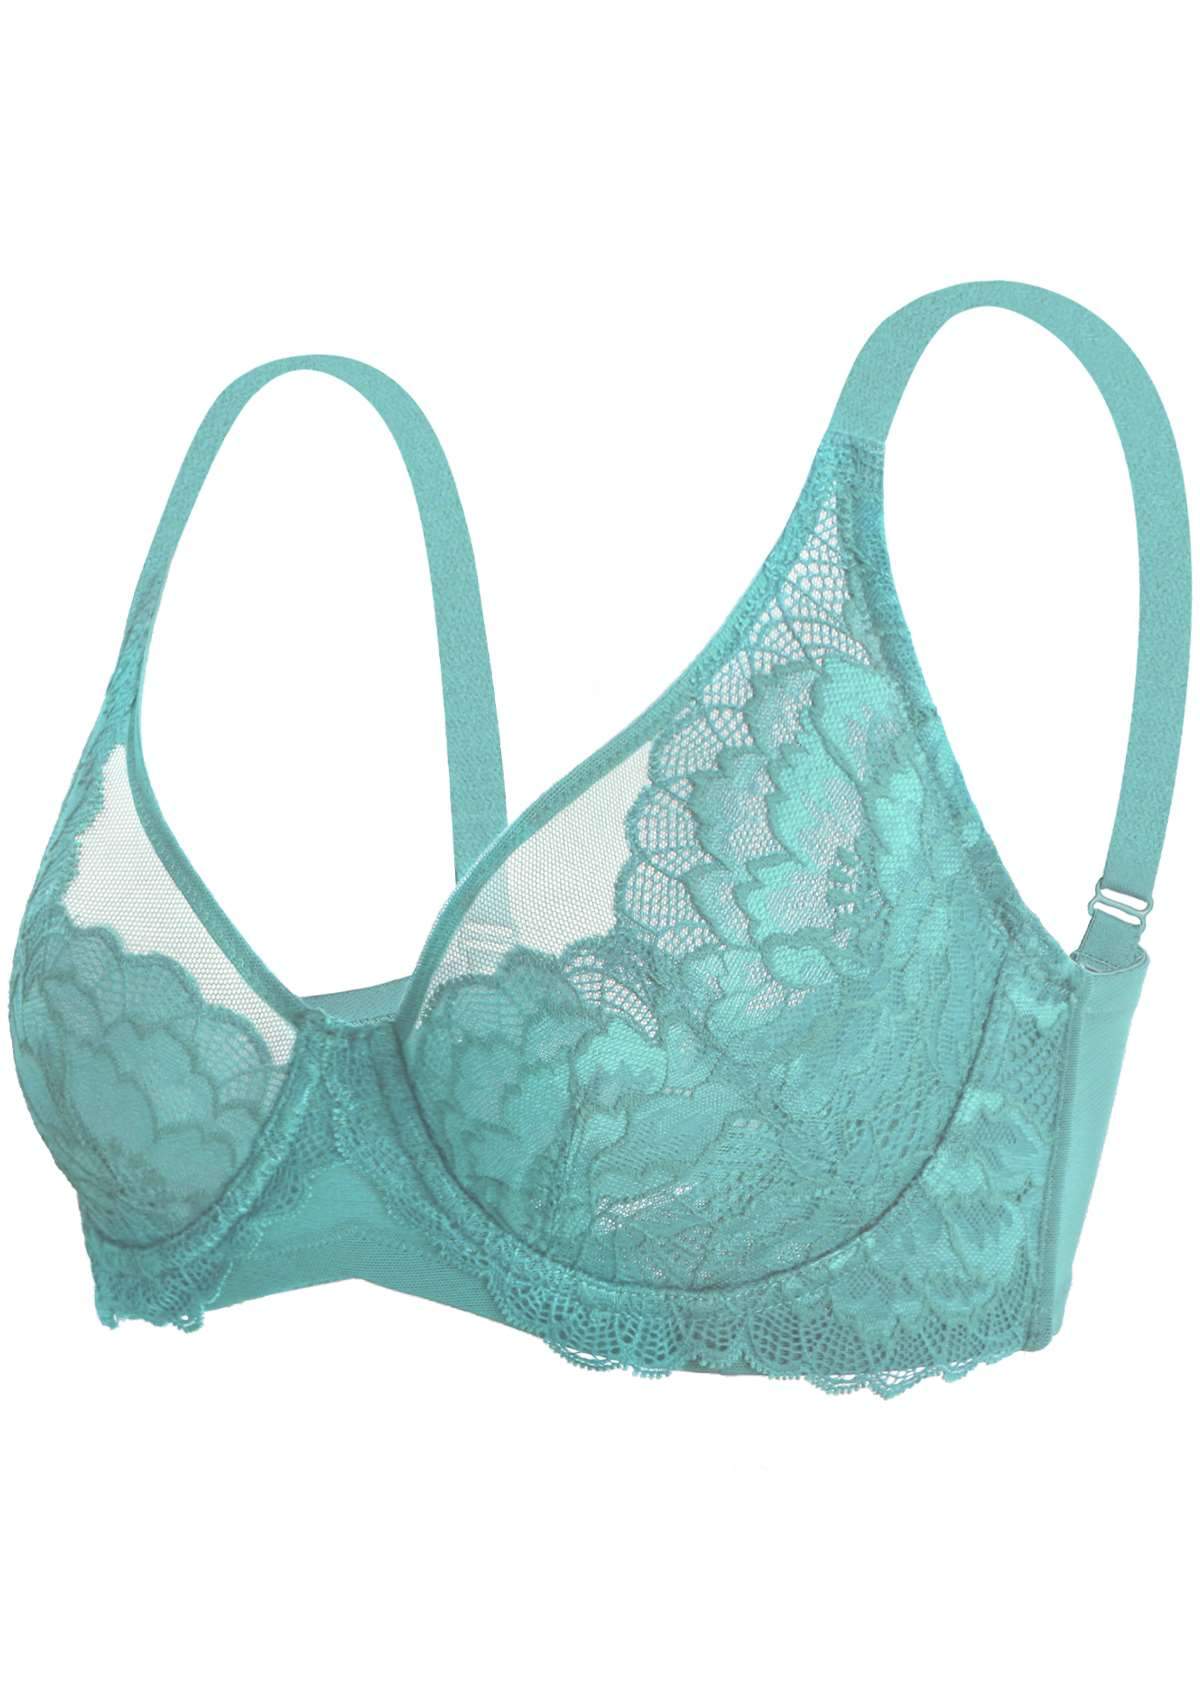 HSIA Peony Lace Unlined Supportive Underwire Bra - Green / 34 / C